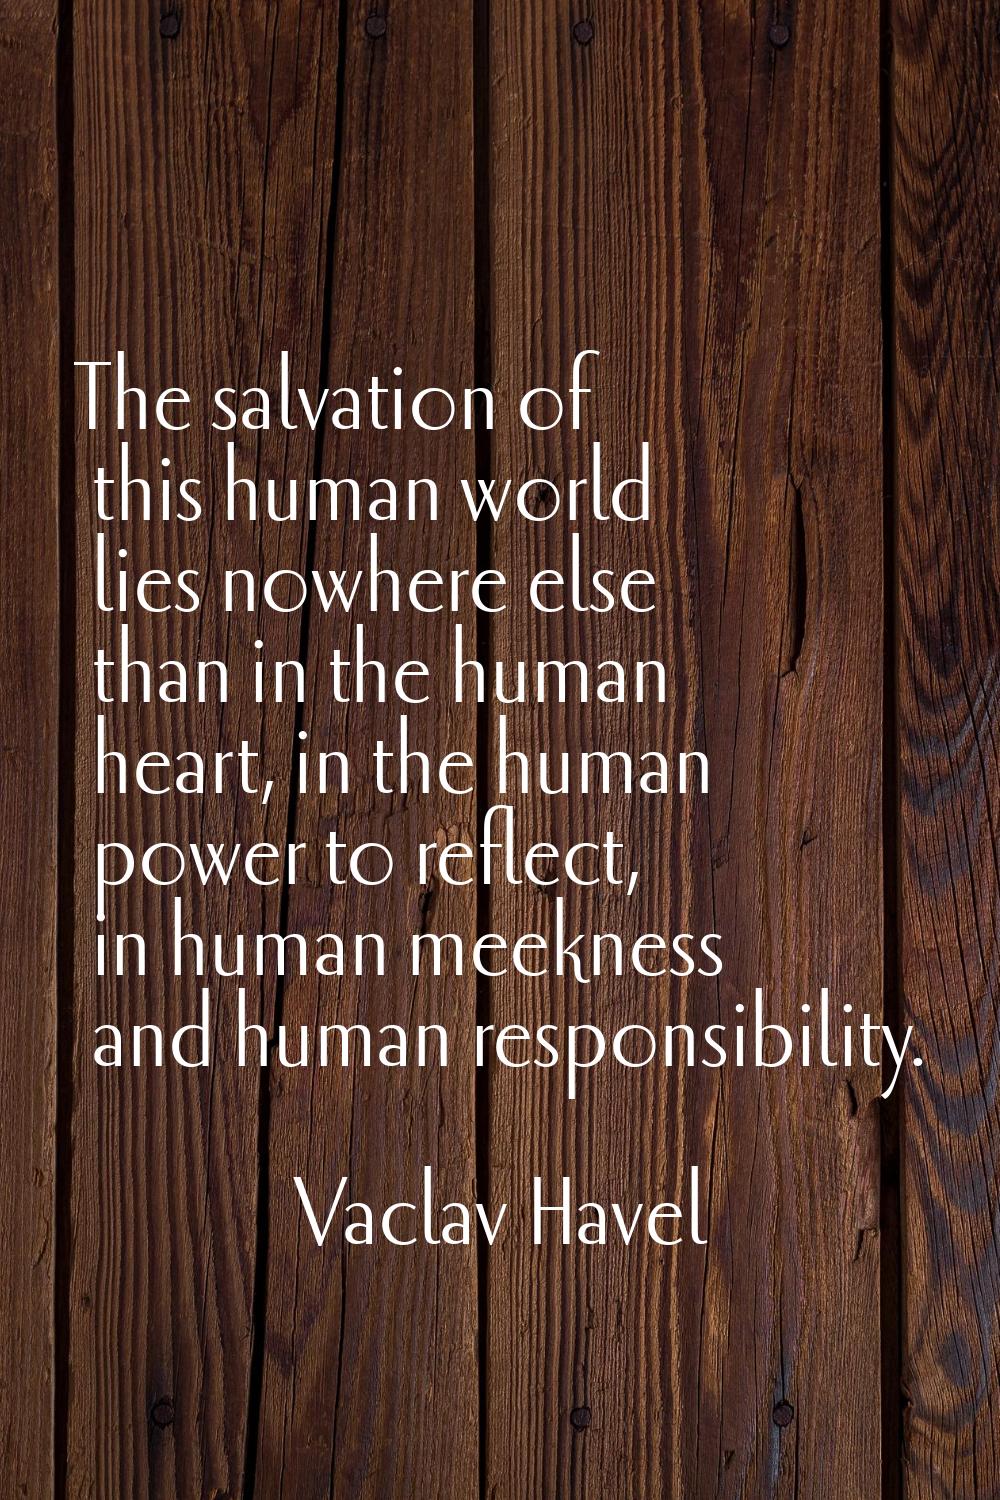 The salvation of this human world lies nowhere else than in the human heart, in the human power to 